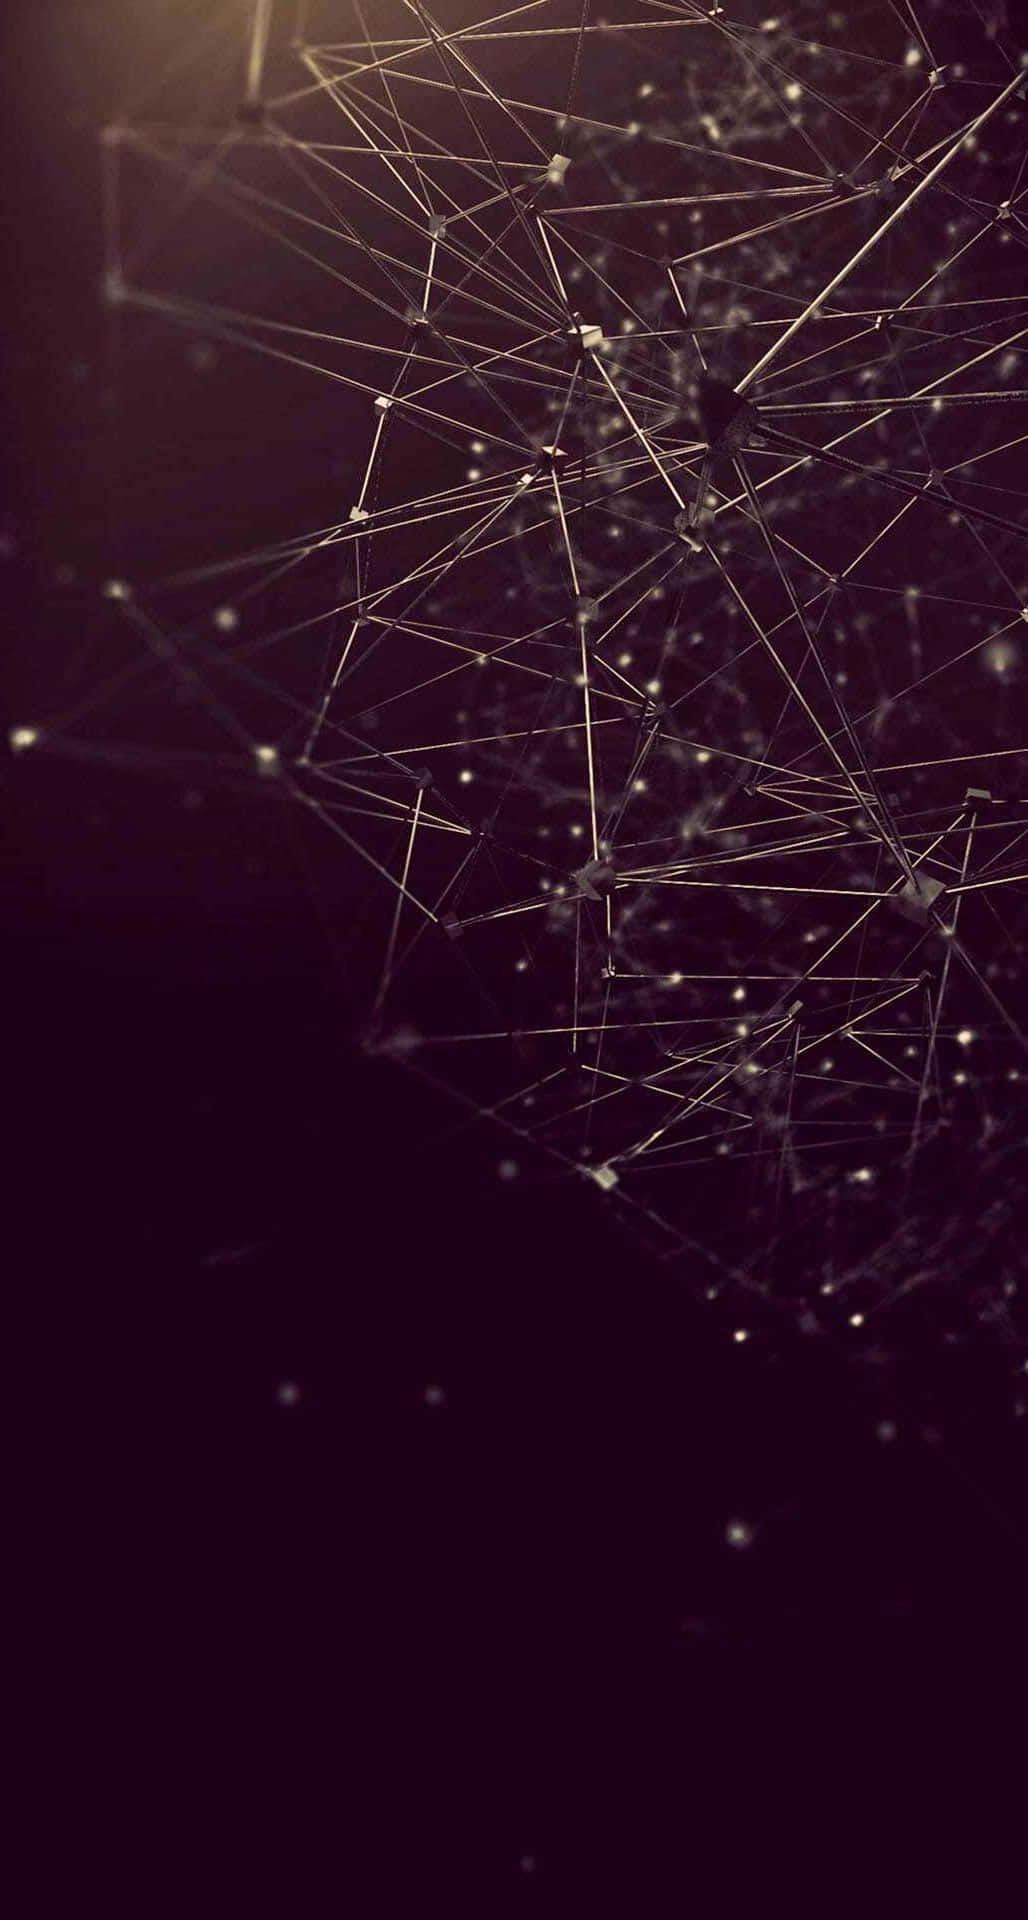 A Dark Background With A Network Of Lines And Dots Wallpaper